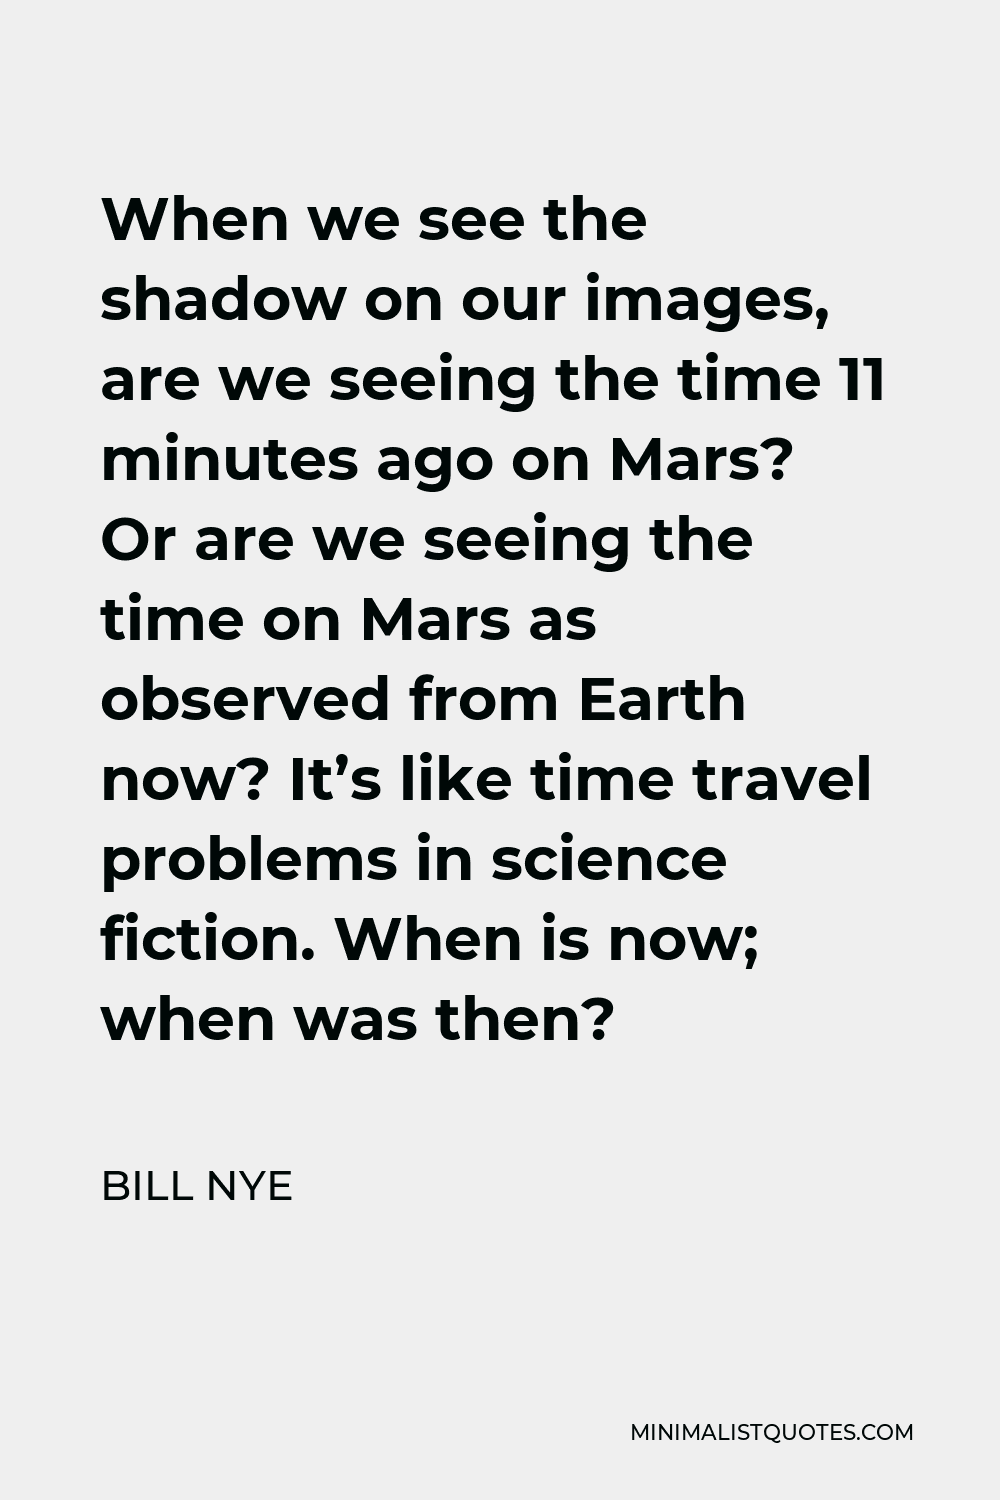 Bill Nye Quote - When we see the shadow on our images, are we seeing the time 11 minutes ago on Mars? Or are we seeing the time on Mars as observed from Earth now? It’s like time travel problems in science fiction. When is now; when was then?